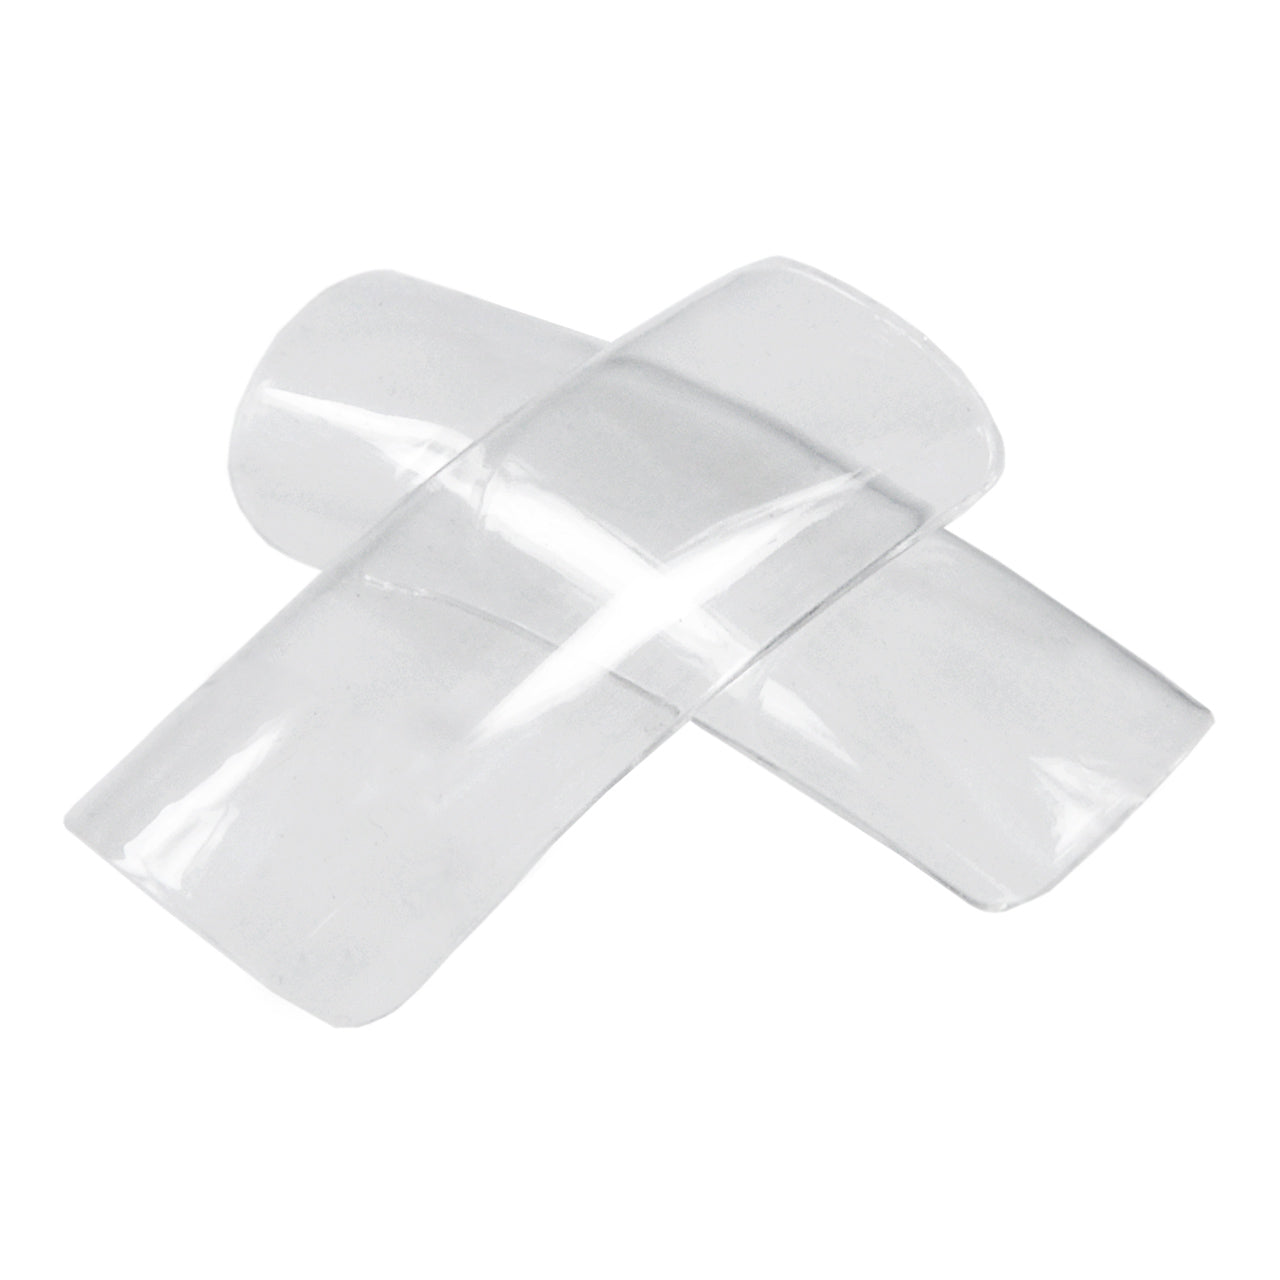 Soft Gel Nail Tips Standard/Square Shape 500 in Tipbox